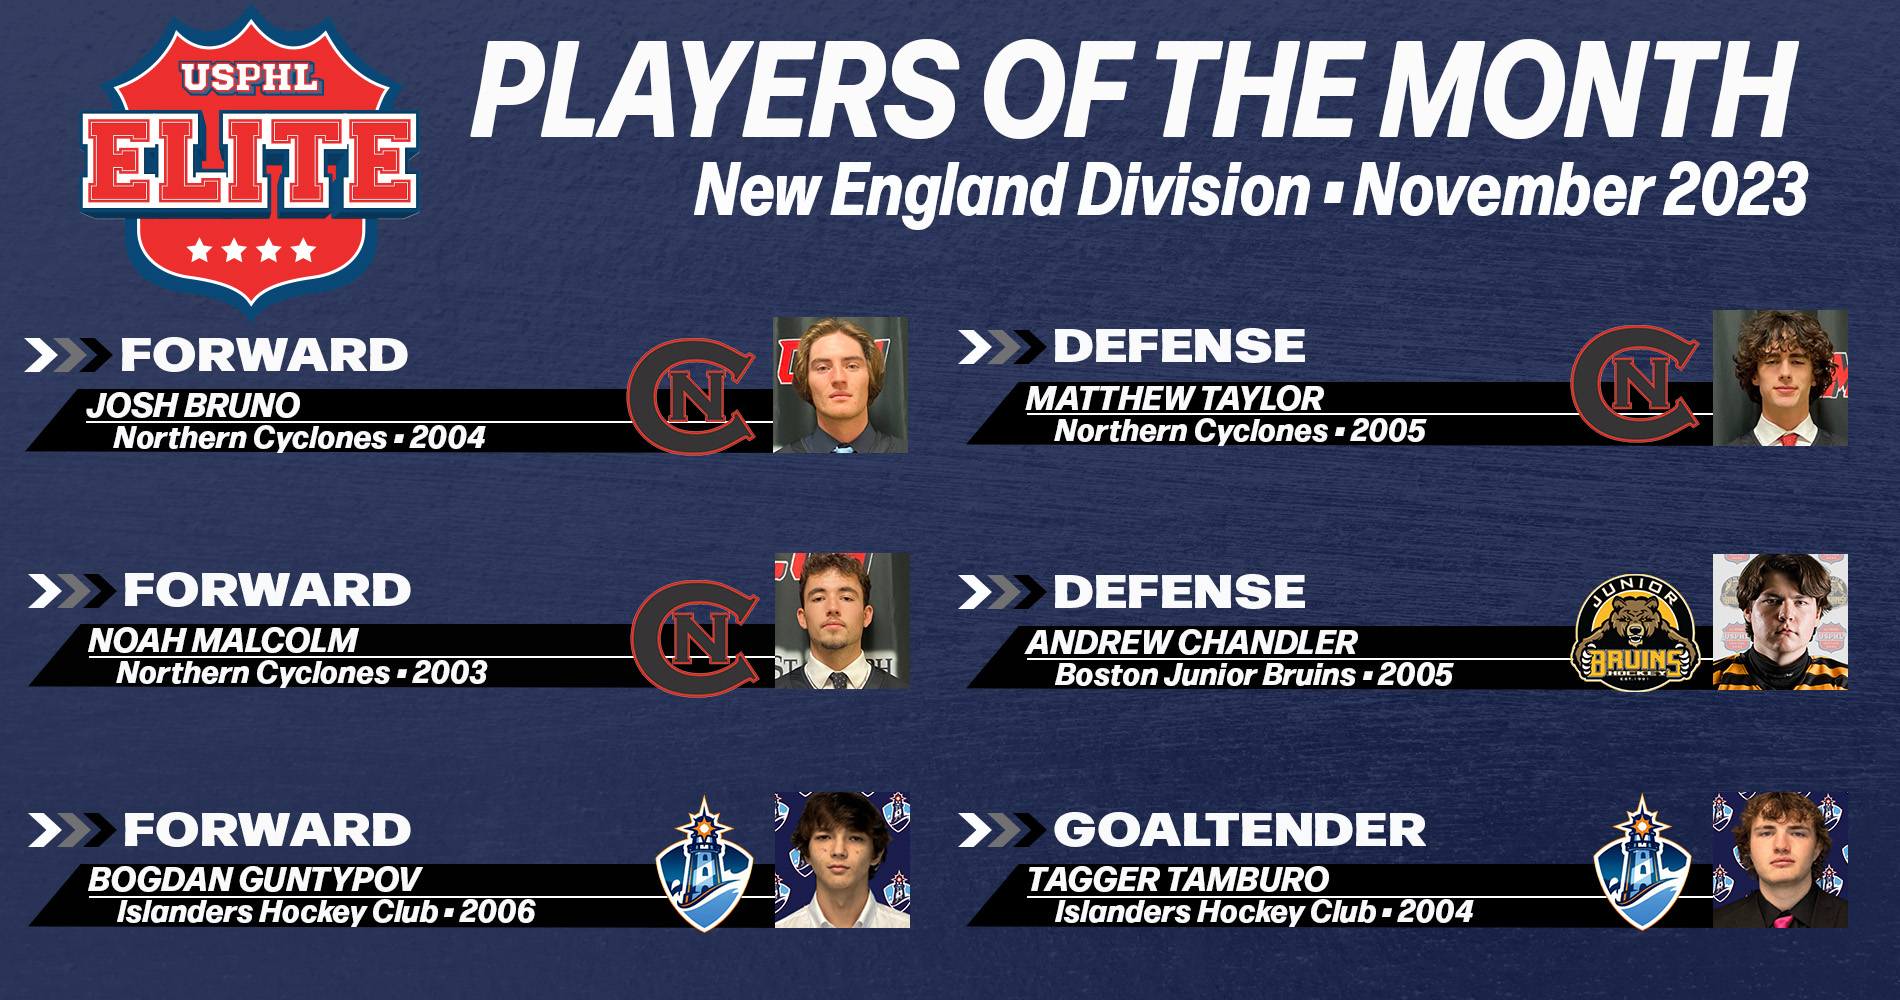 USPHL Elite 2023-24 New England Division Players Of The Month: November 2023